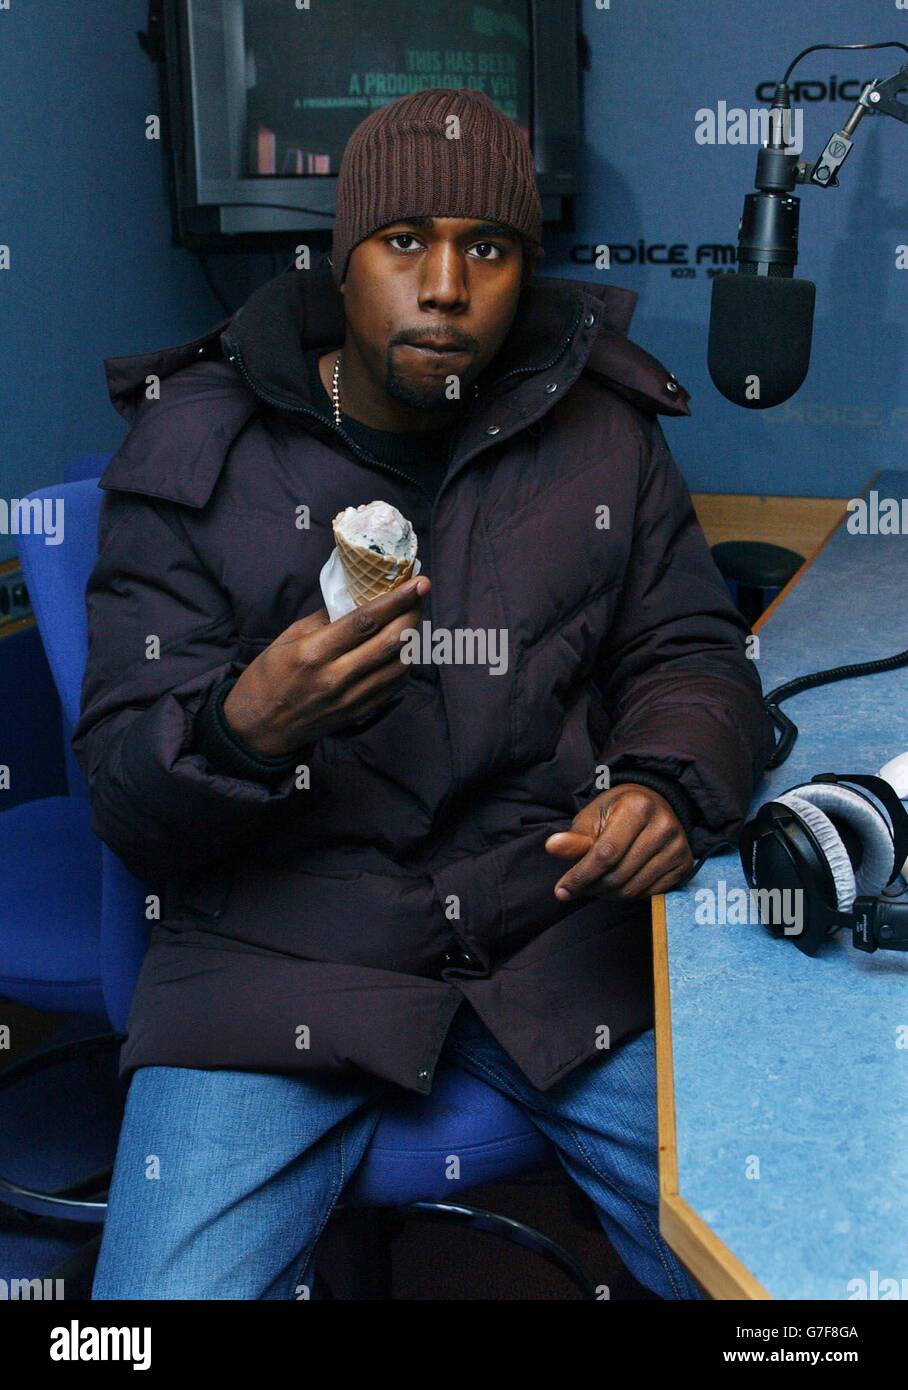 Hip-hop artist Kanye West poses for photographs before his live radio  interview with DJ Jigs on Choice FM, at their new studios in the Capital  Radio building, Leicester Square, central London Stock